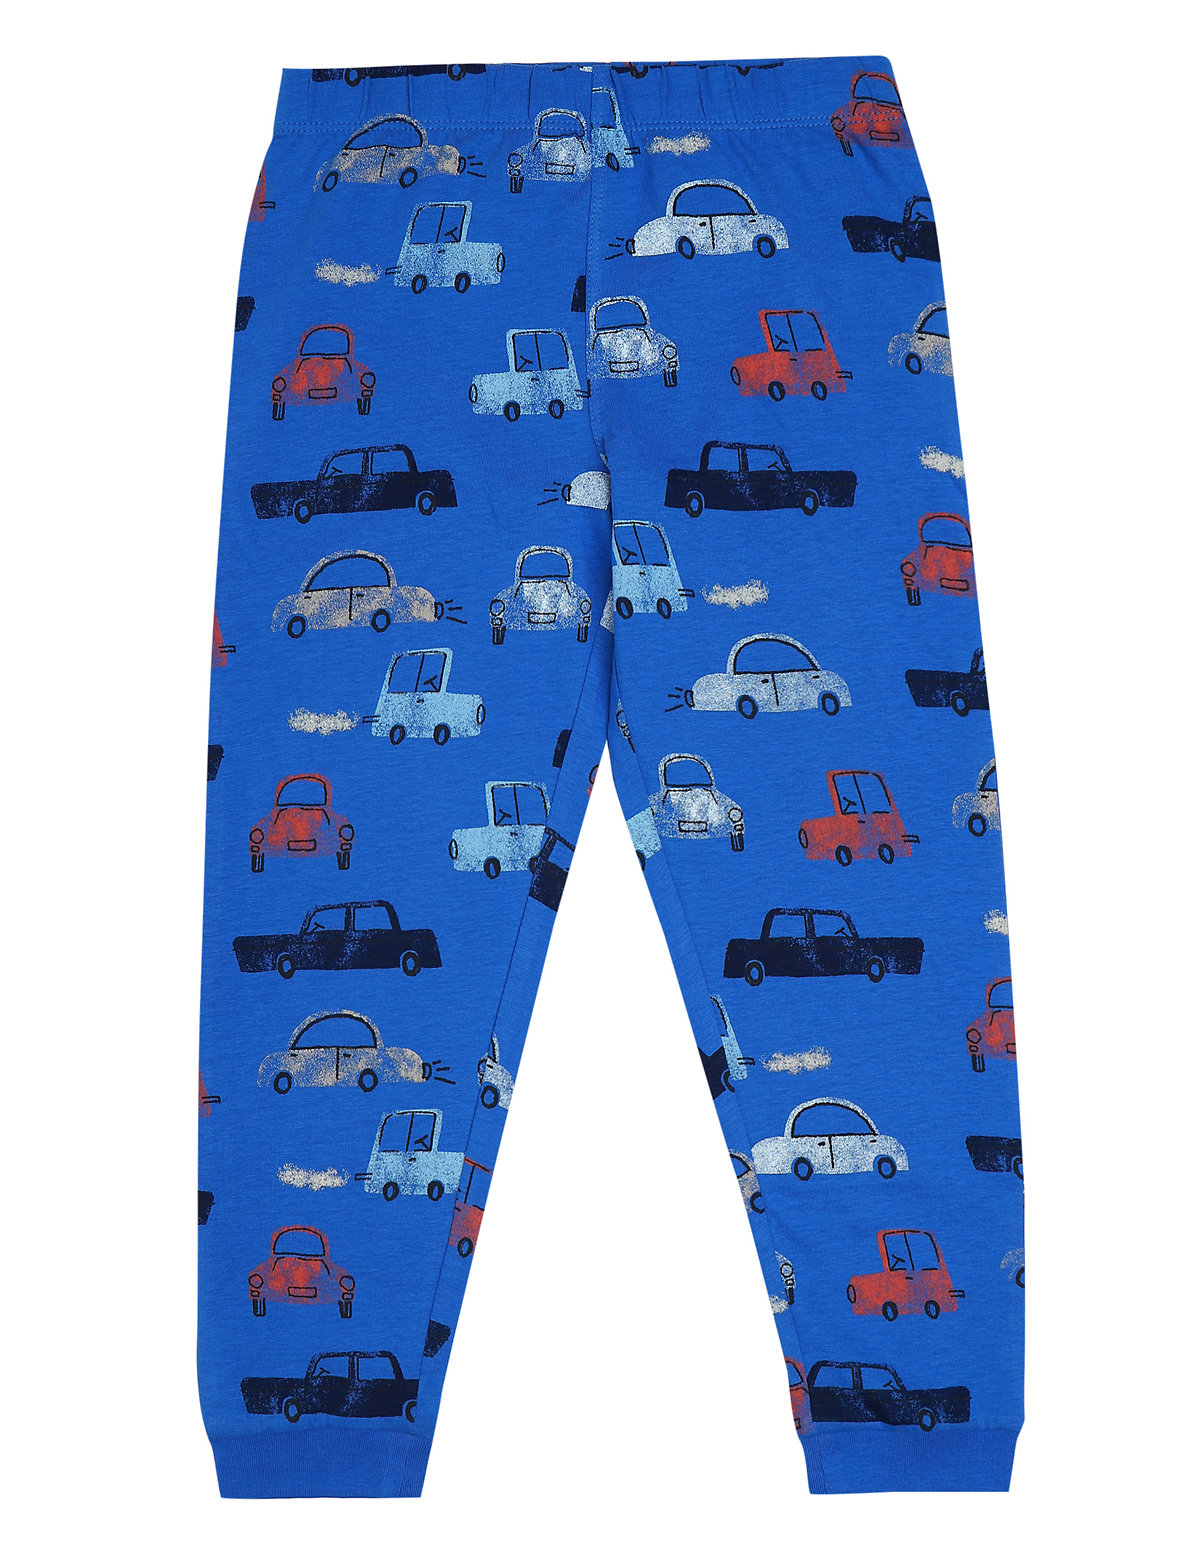 Pure Cotton Printed Night suit Set of 3